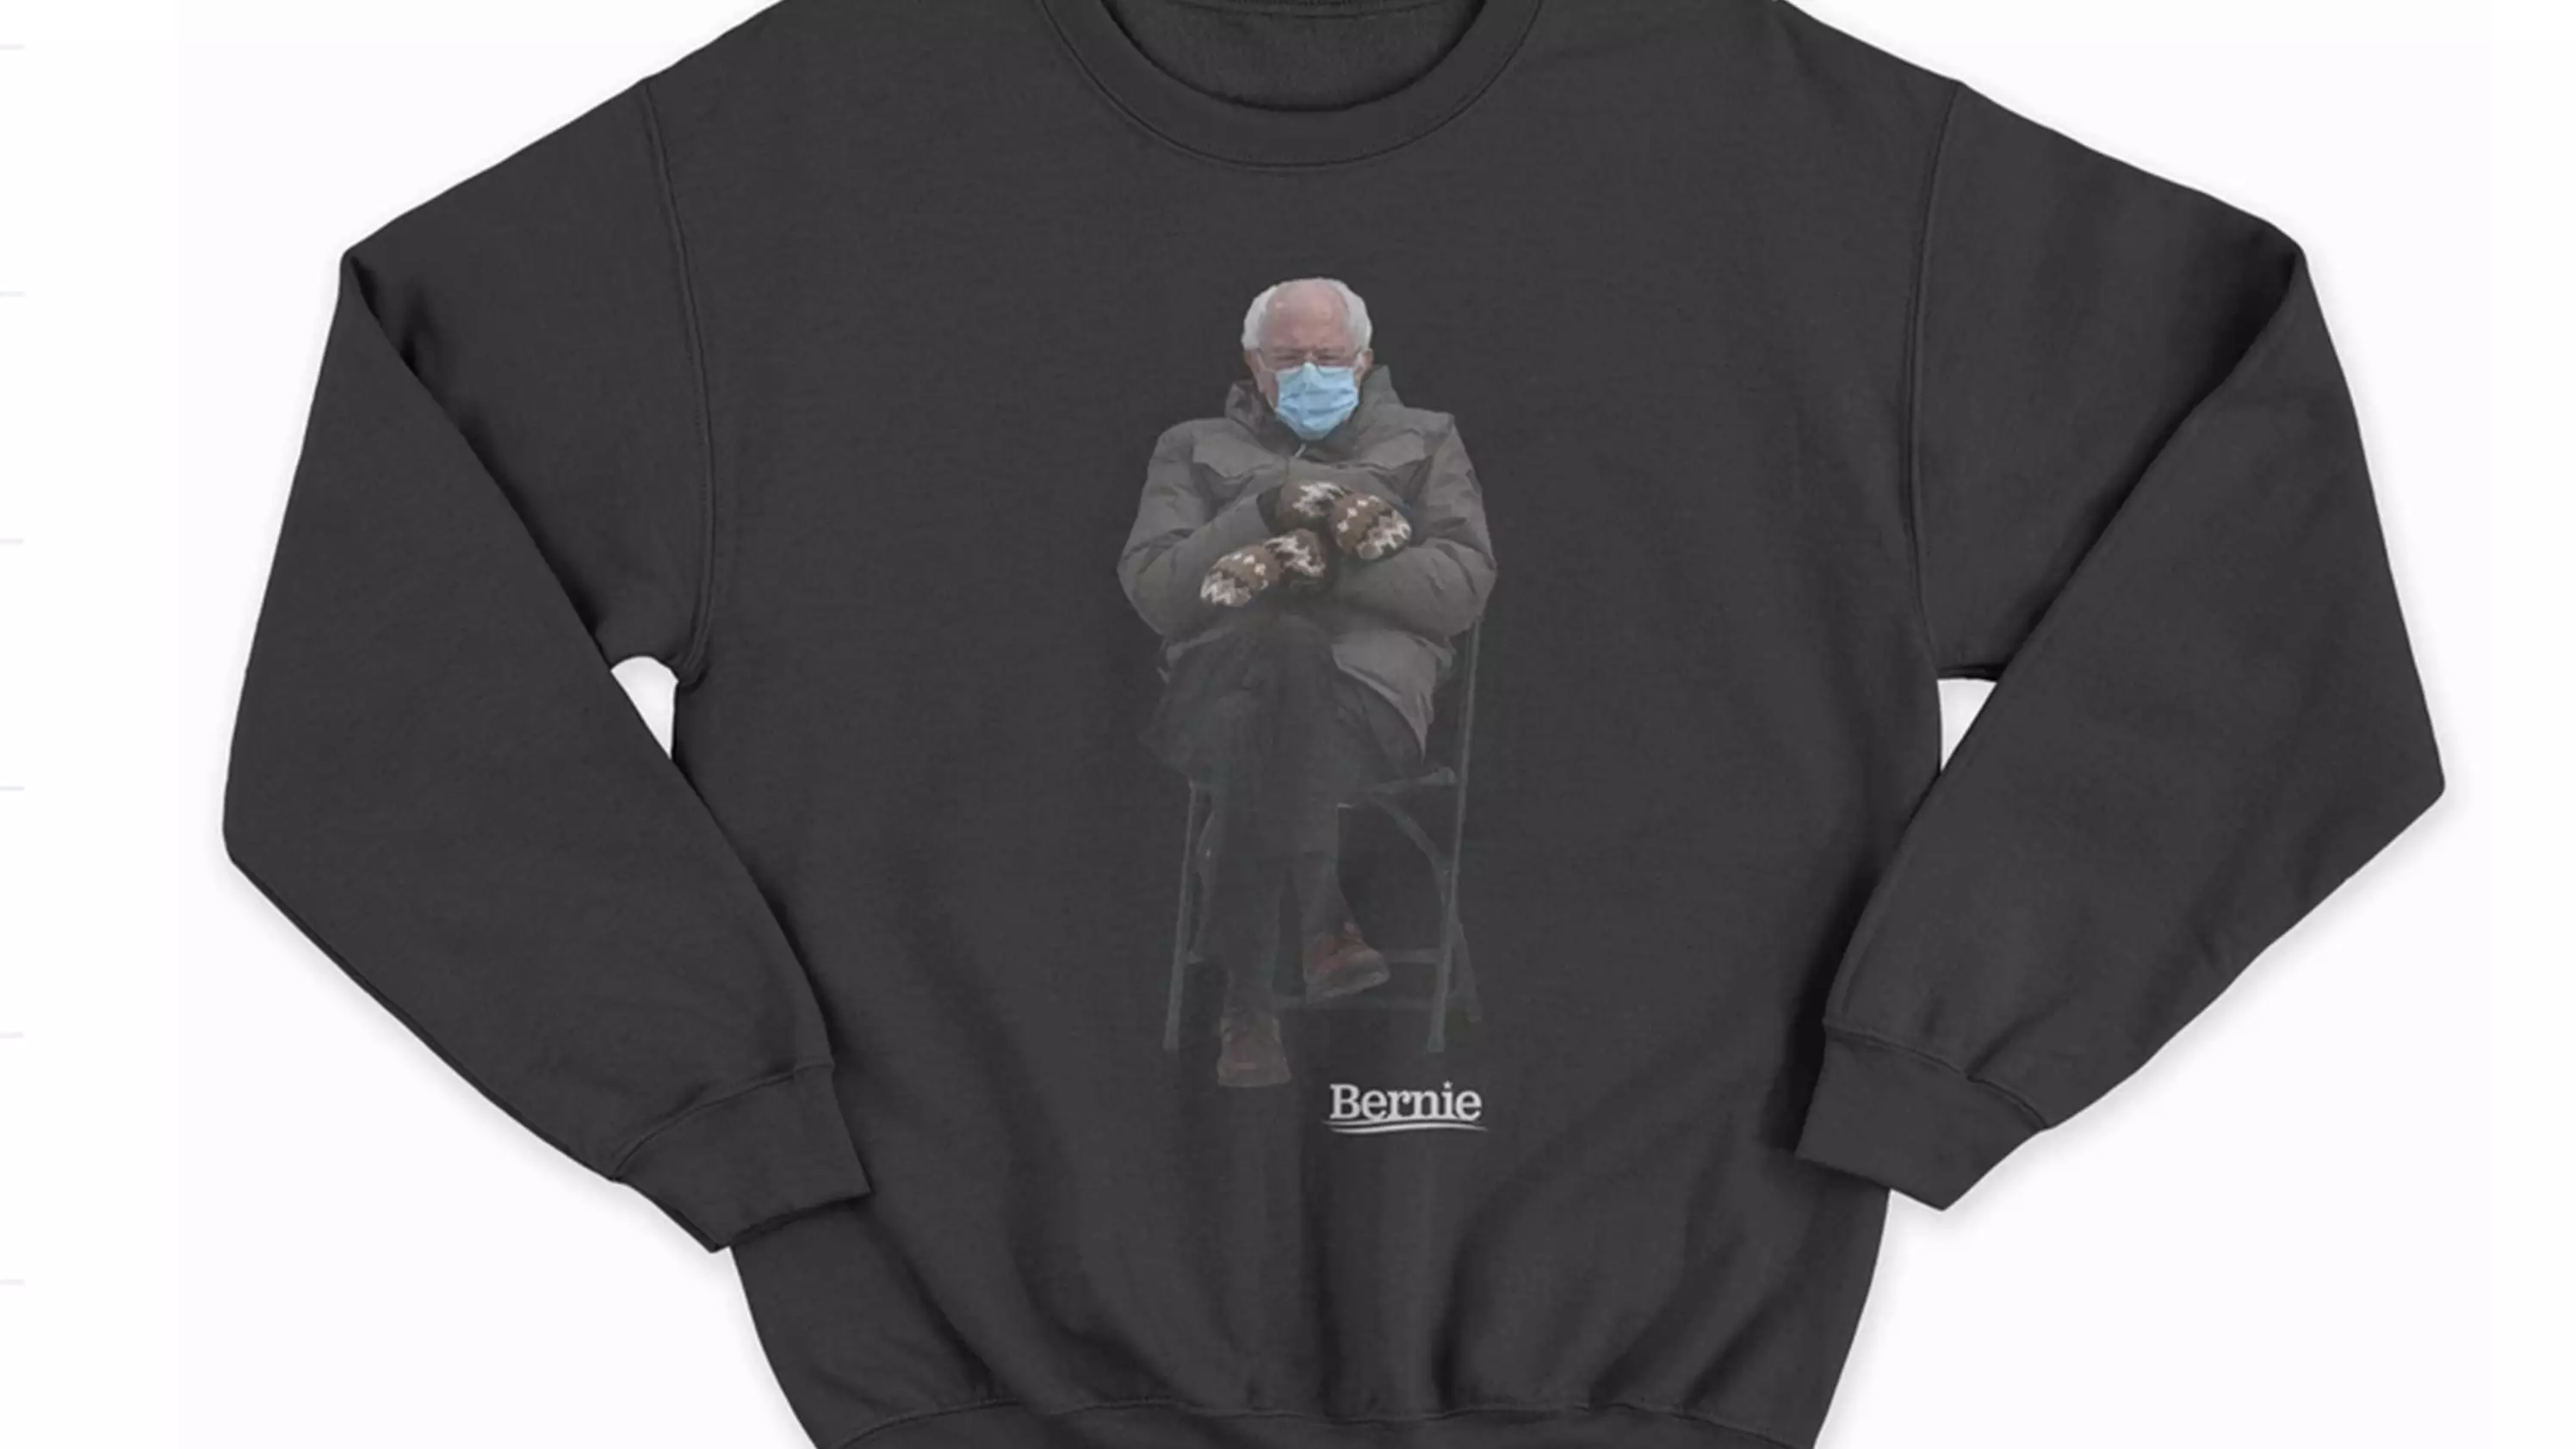 Bernie Sanders Is Selling Sweaters With His Viral Inauguration Photo On Them For Charity